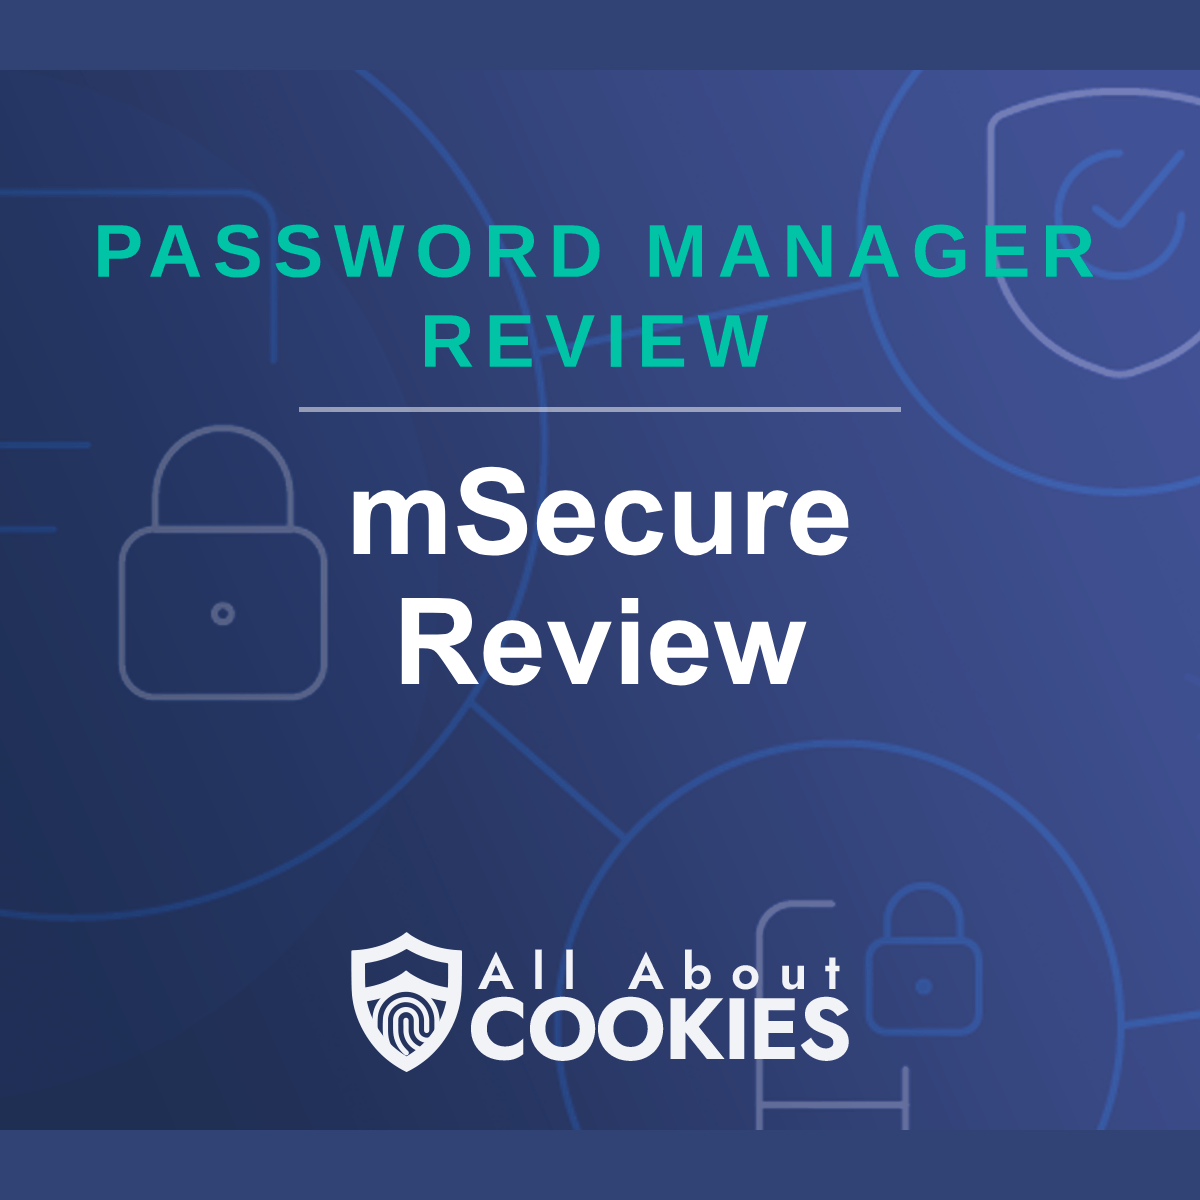 A blue background with images of locks and shields with the text &quot;mSecure Review&quot; and the All About Cookies logo. 